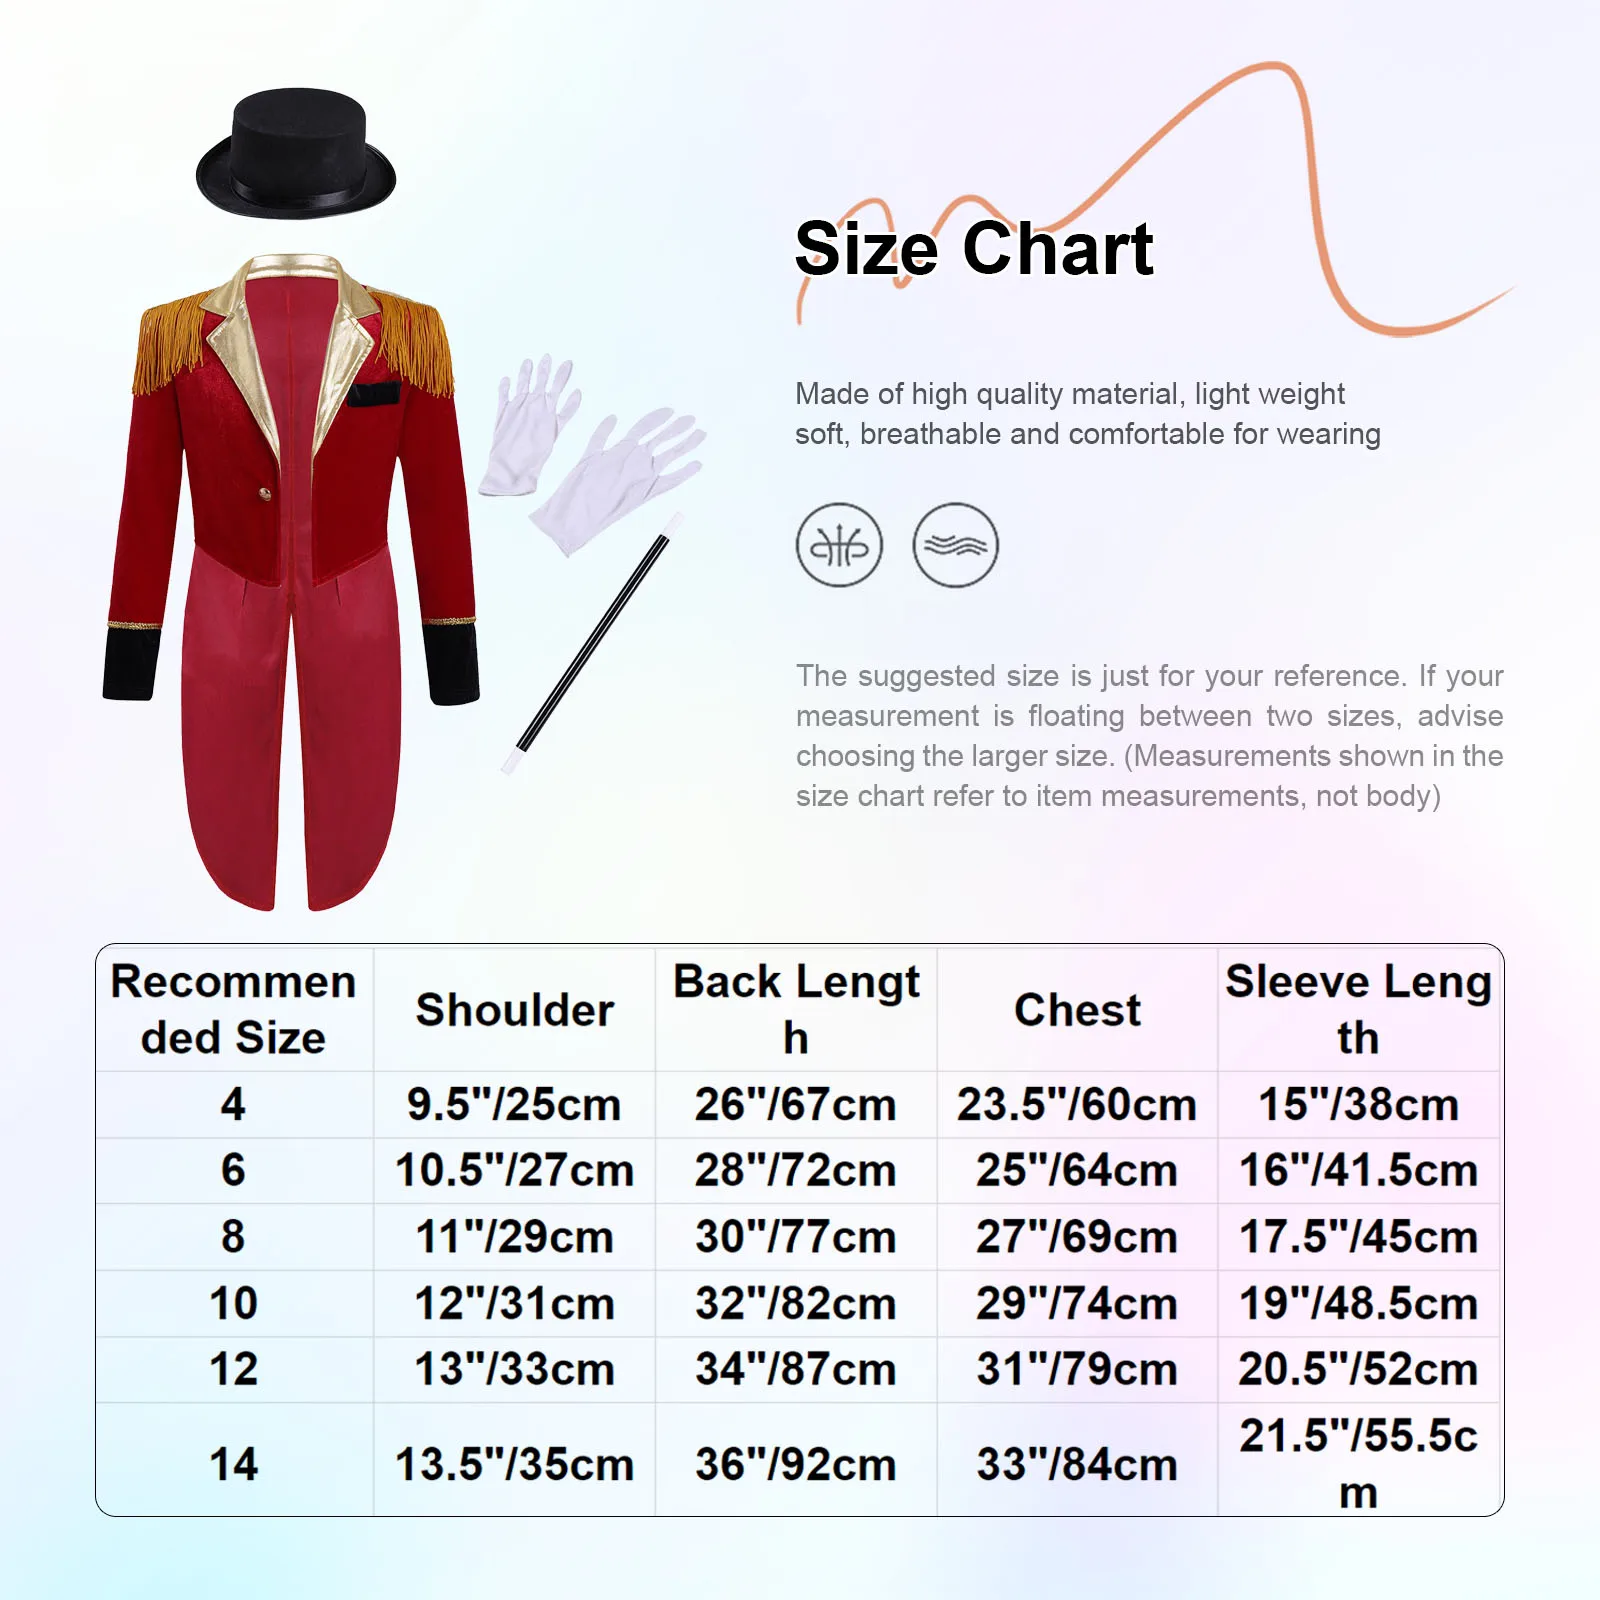 Kids Boys Circus Jacket Costume Medieval Ringmaster Tuxedo Coat Lapel Tailcoat with Hat Magic Wand Gloves Halloween Cosplay Suit